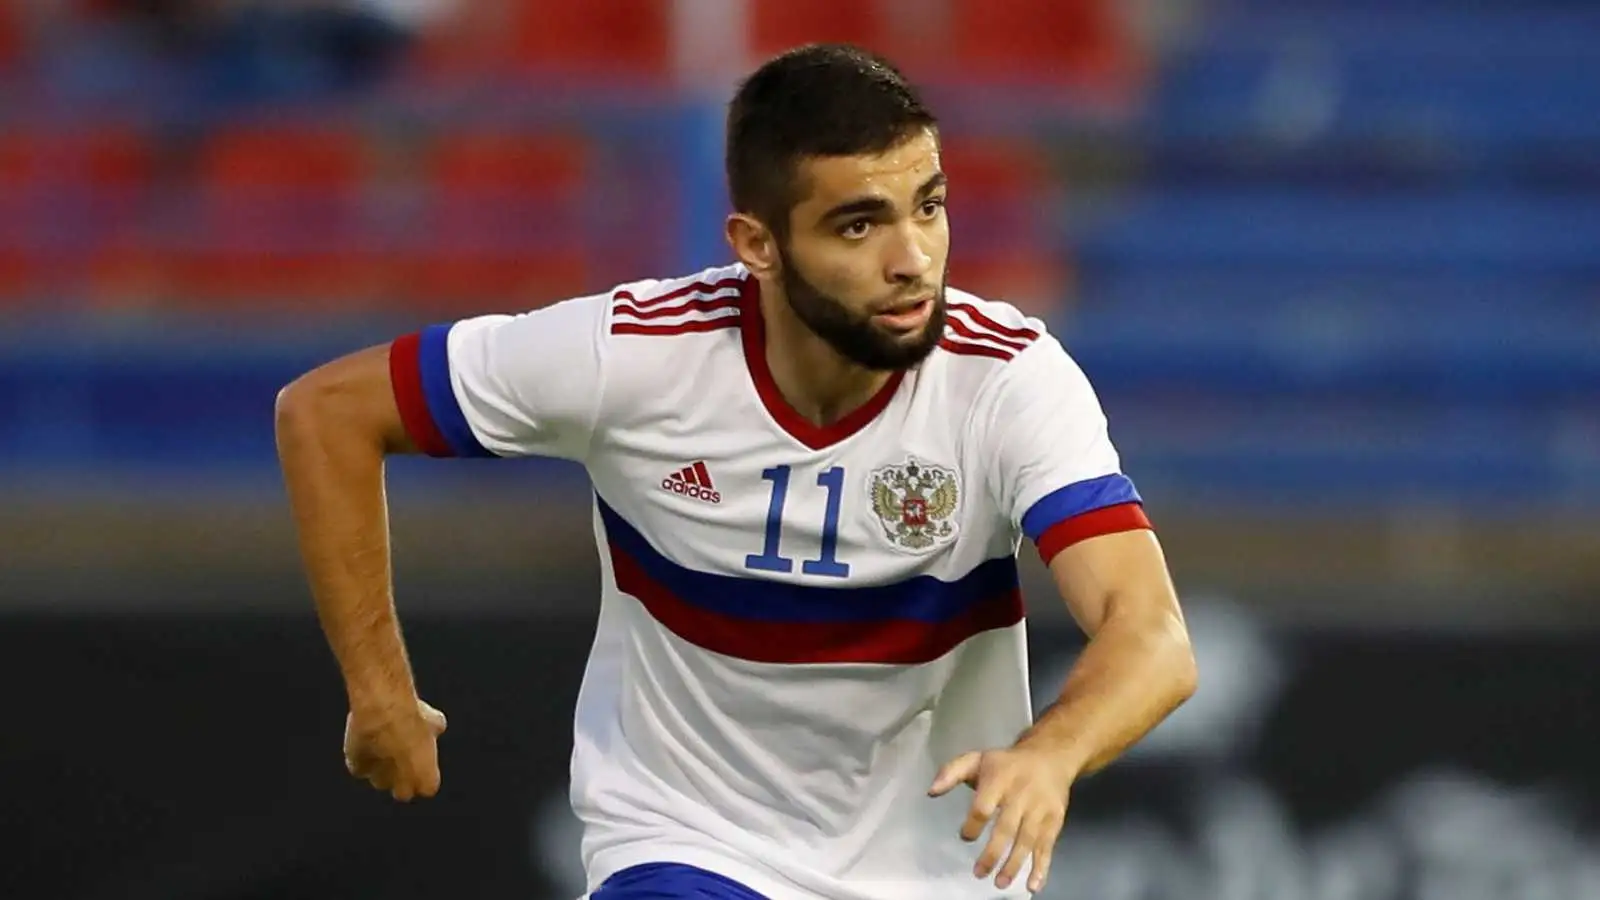 Newcastle transfer news: Magpies in the running for 21-year-old striker Gamid Agalarov